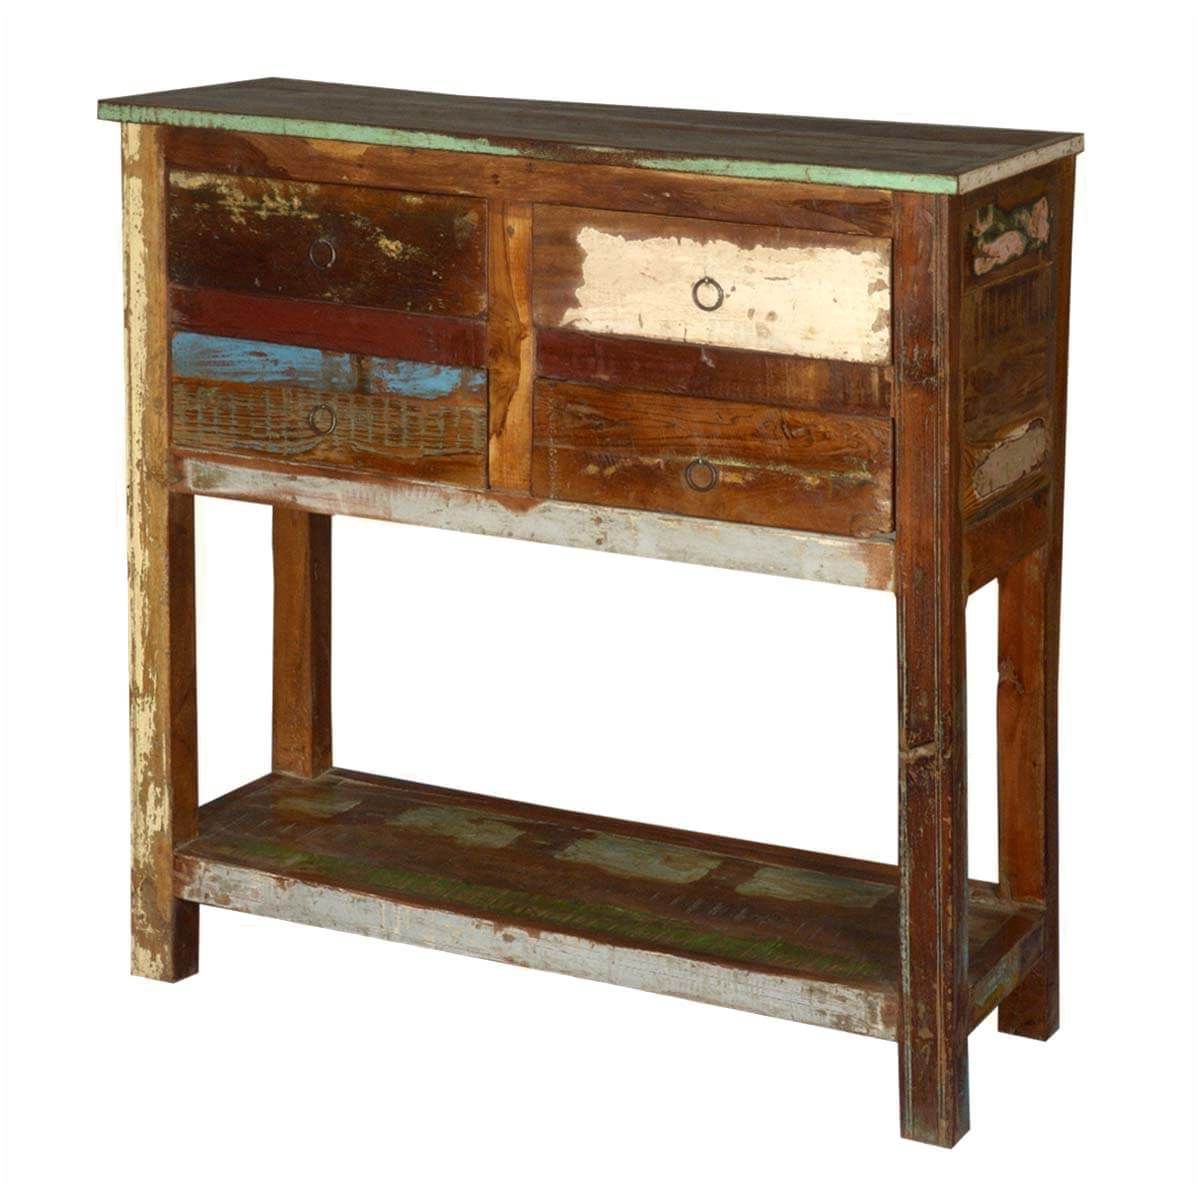 Favorite 2 Tier Reclaimed Wood Console Table With 4 Drawers For Barnwood Console Tables (View 5 of 10)